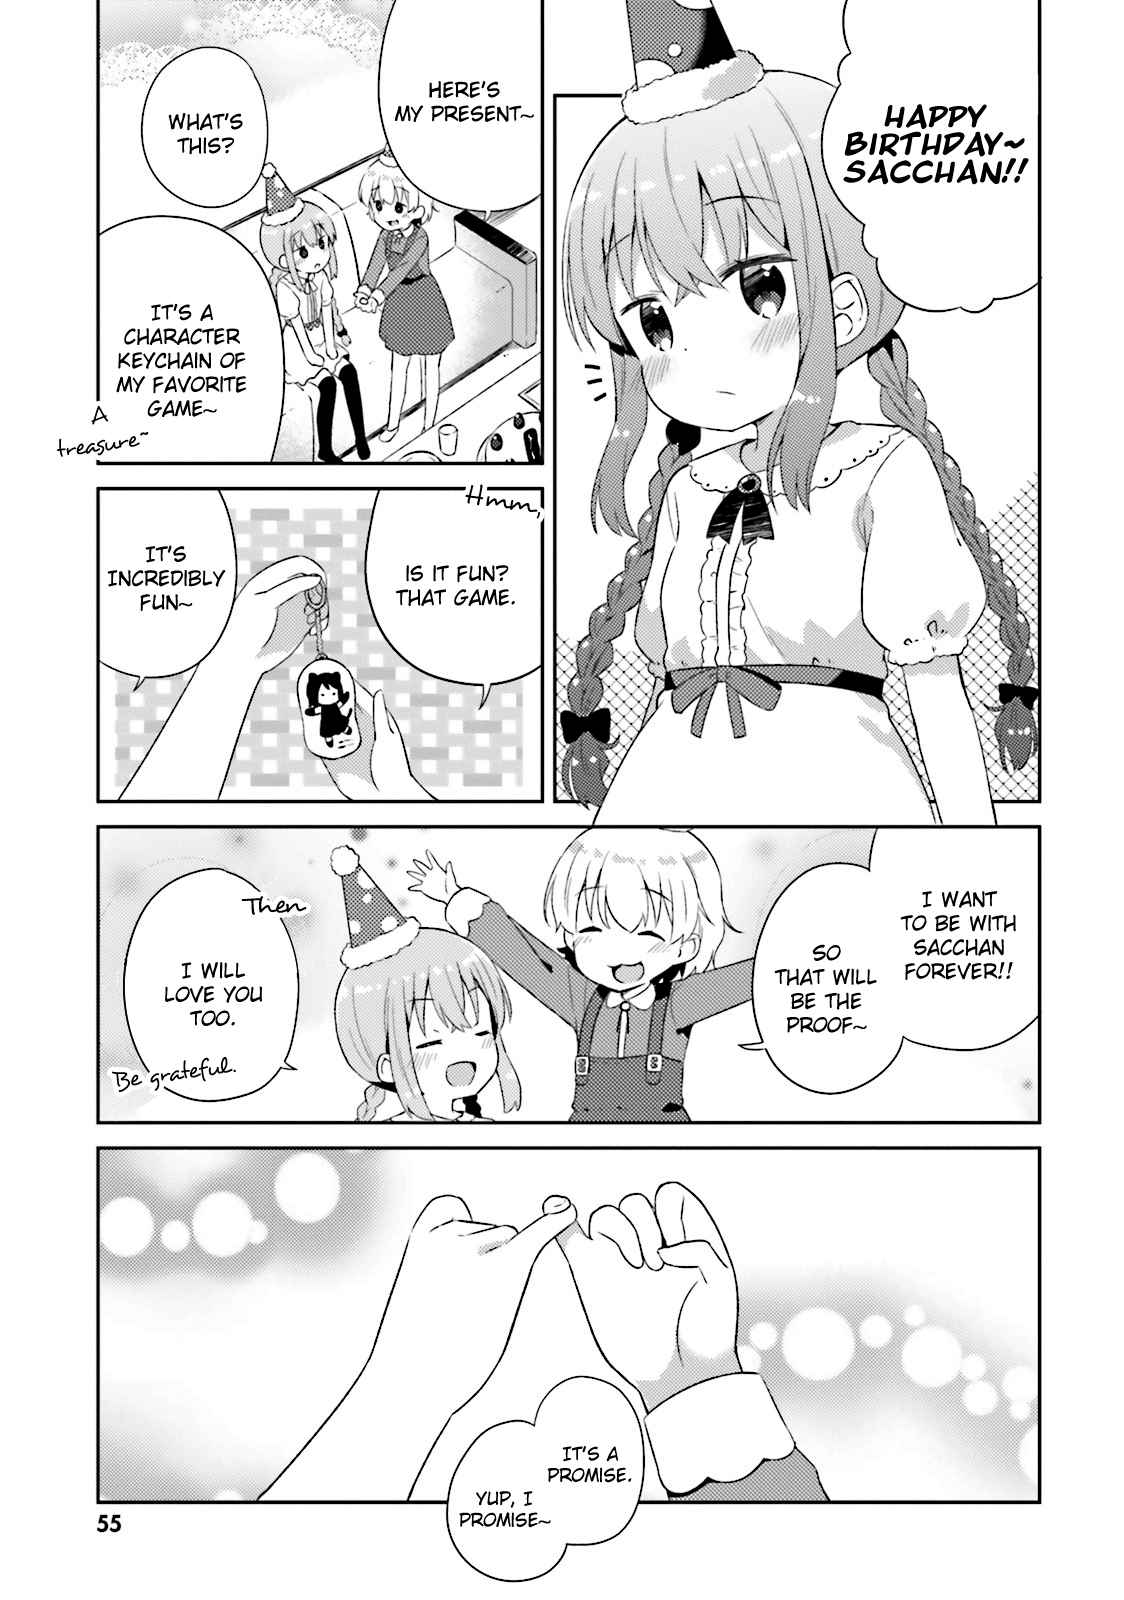 She Gets Girls Every day. Vol. 2 Ch. 10 You Are Not Alone.